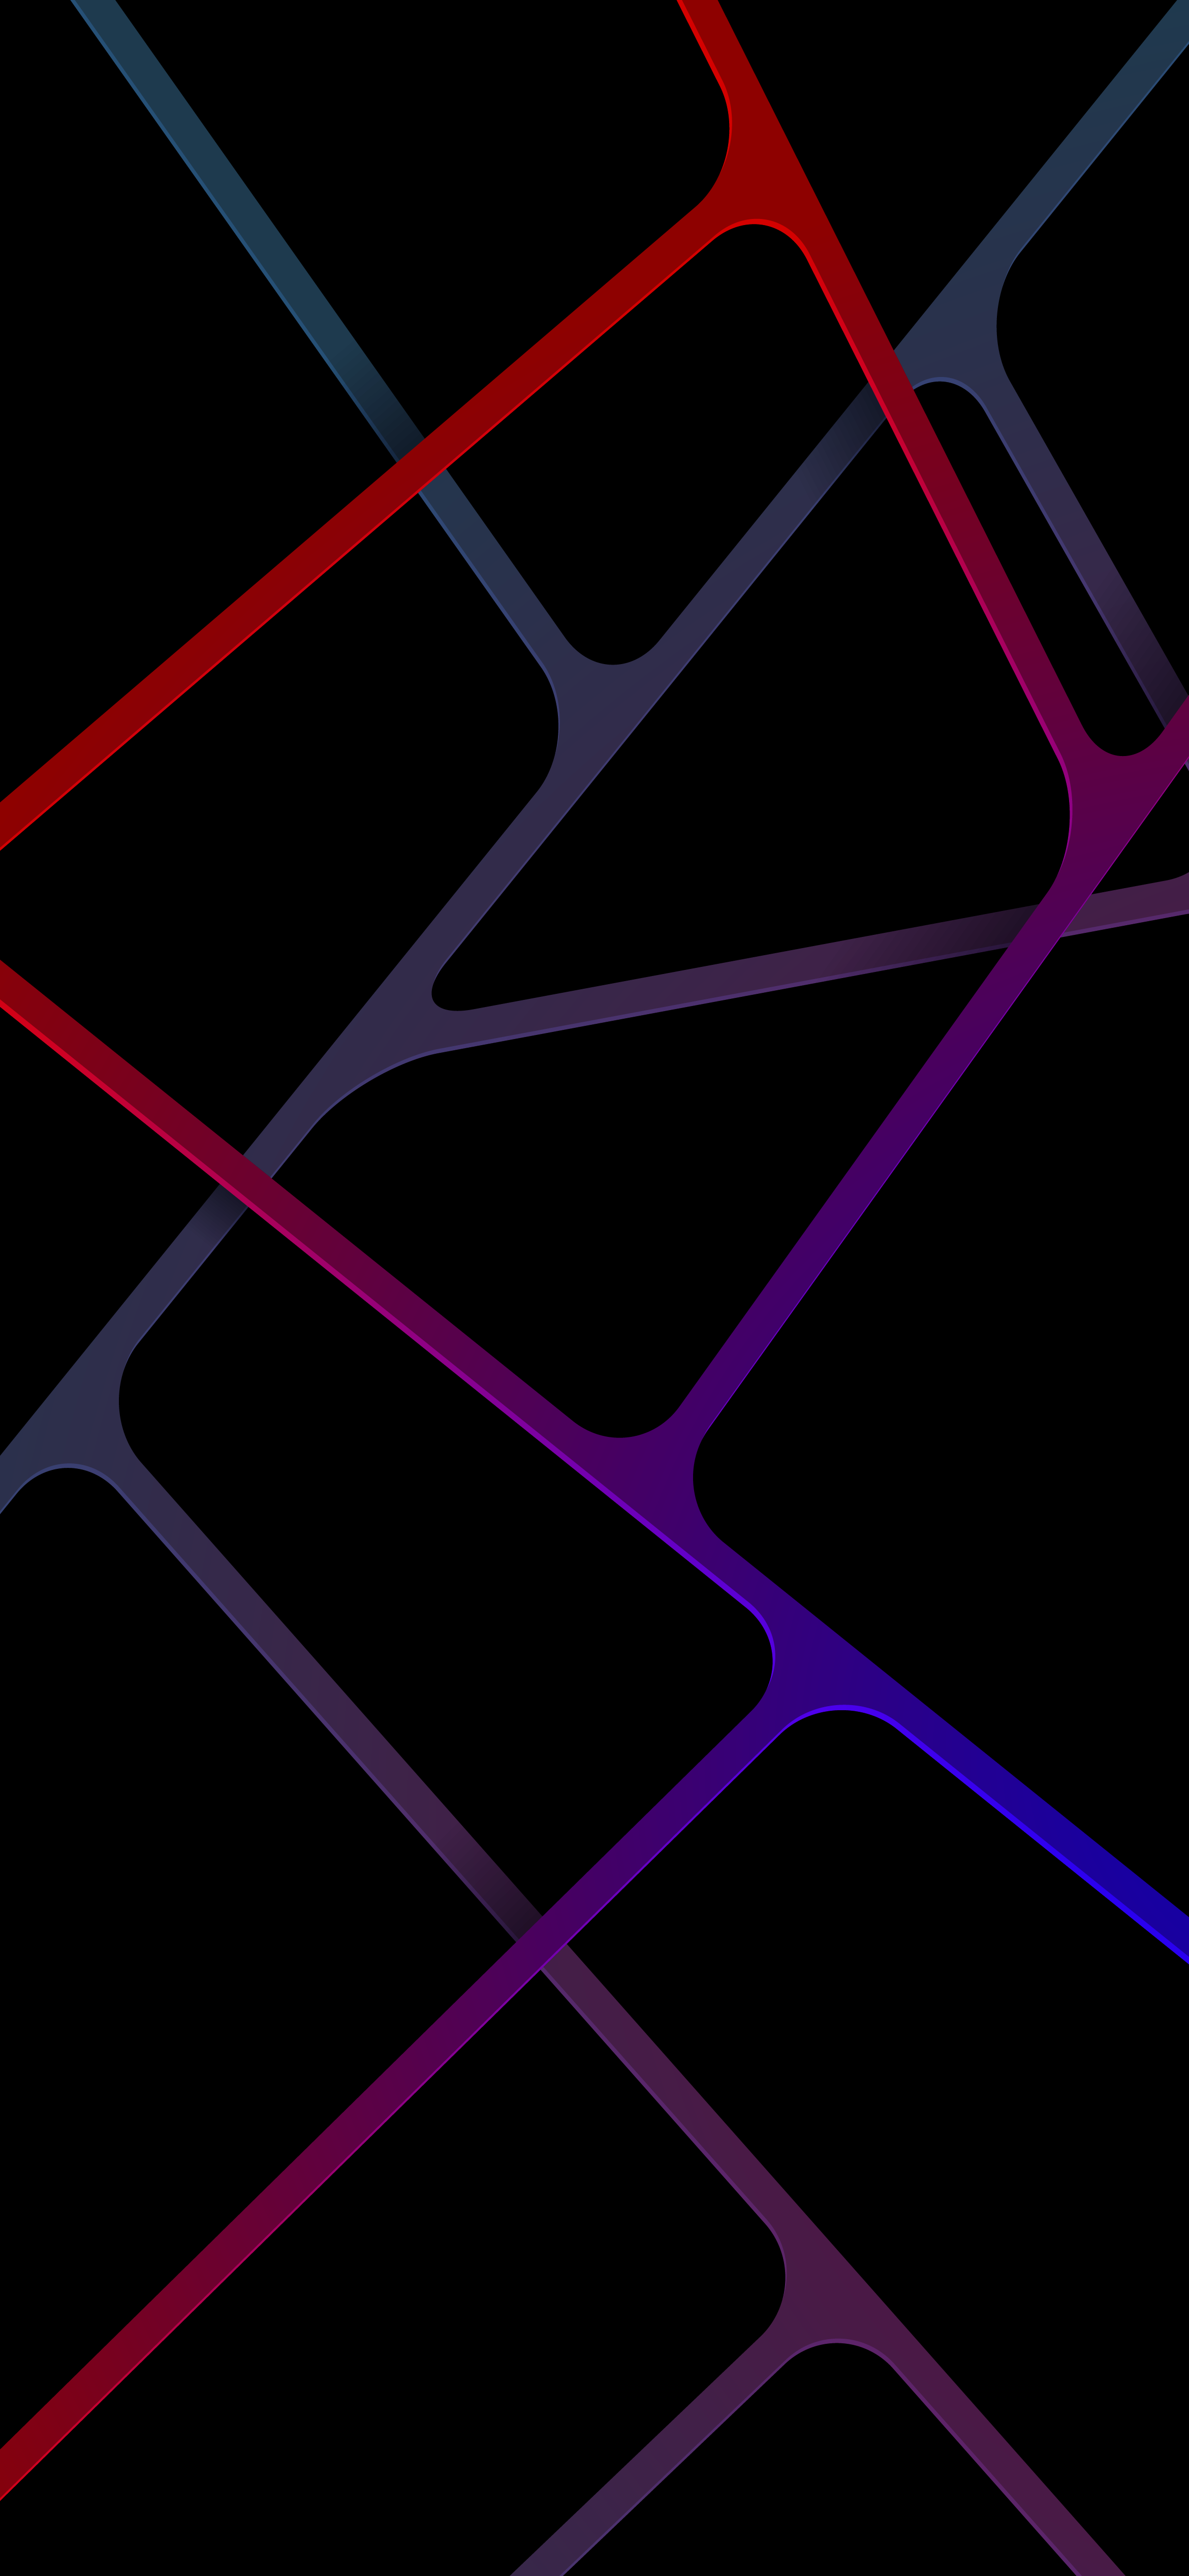 NETWORK WIRES BACKGROUND IMAGE TO USE AS LOCKSCREEN WALLPAPER IN PHONES